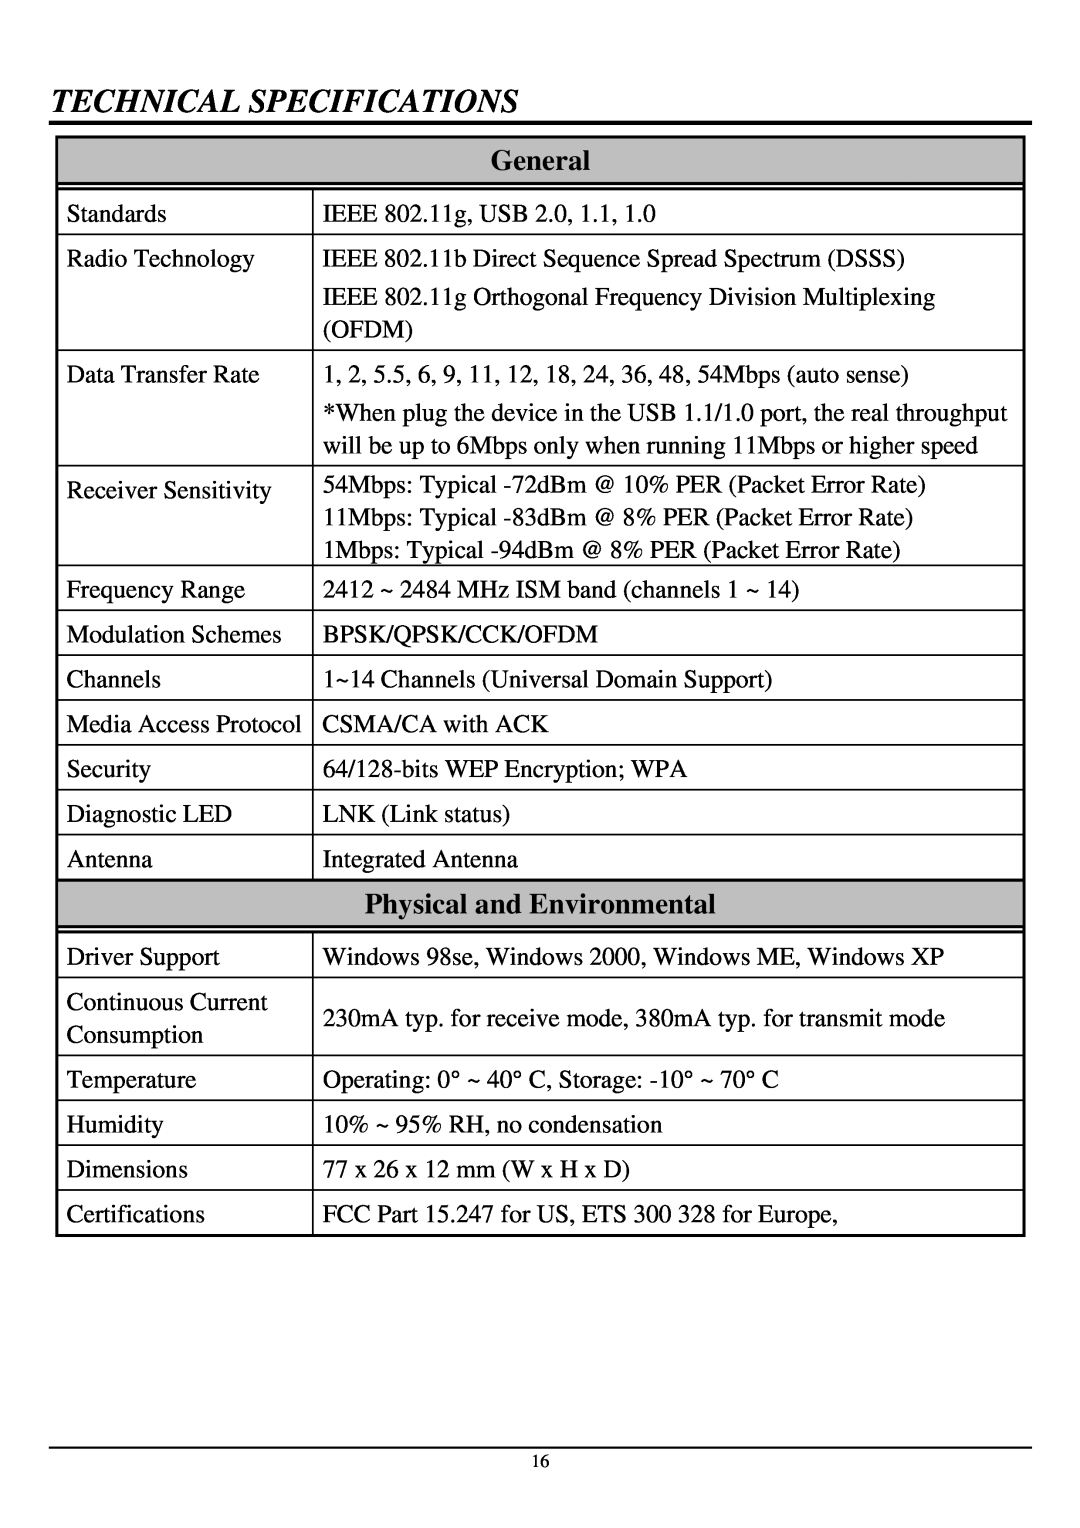 TRENDnet TEW-424UB manual Technical Specifications, General, Physical and Environmental 